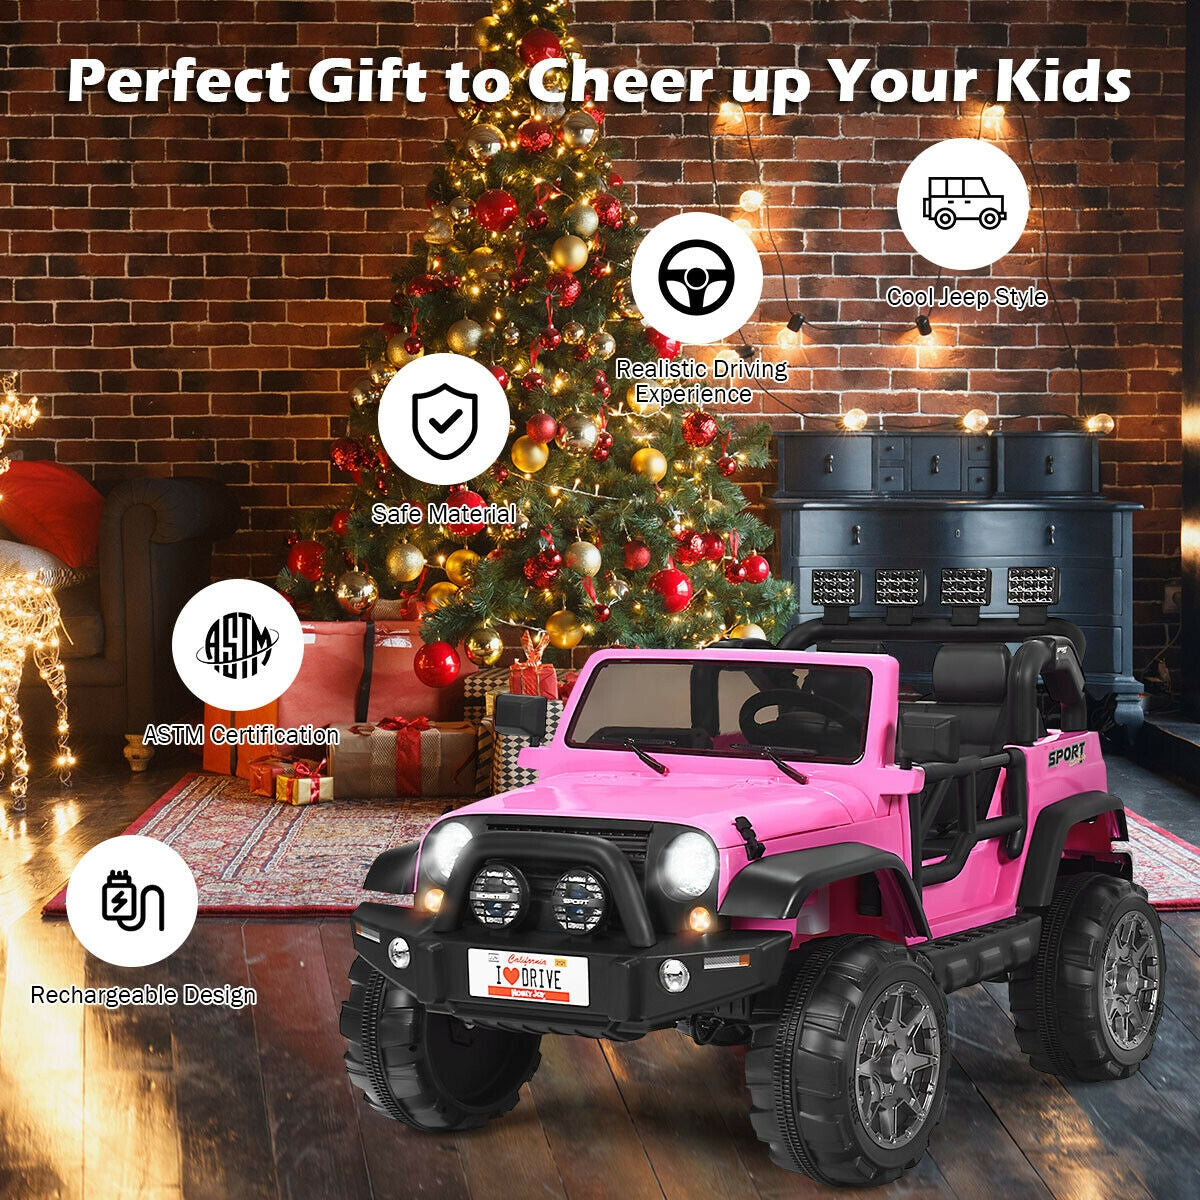 Perfect Gift Choice: Our ride-on truck offers multiple color options and is an ideal gift for children over 3 years old. Crafted with a sturdy PP cover, this ride-on car guarantees lasting delight with a maximum weight capacity of 110 lbs. Charging for 8-12 hours provides 1 hour of exhilarating fun.